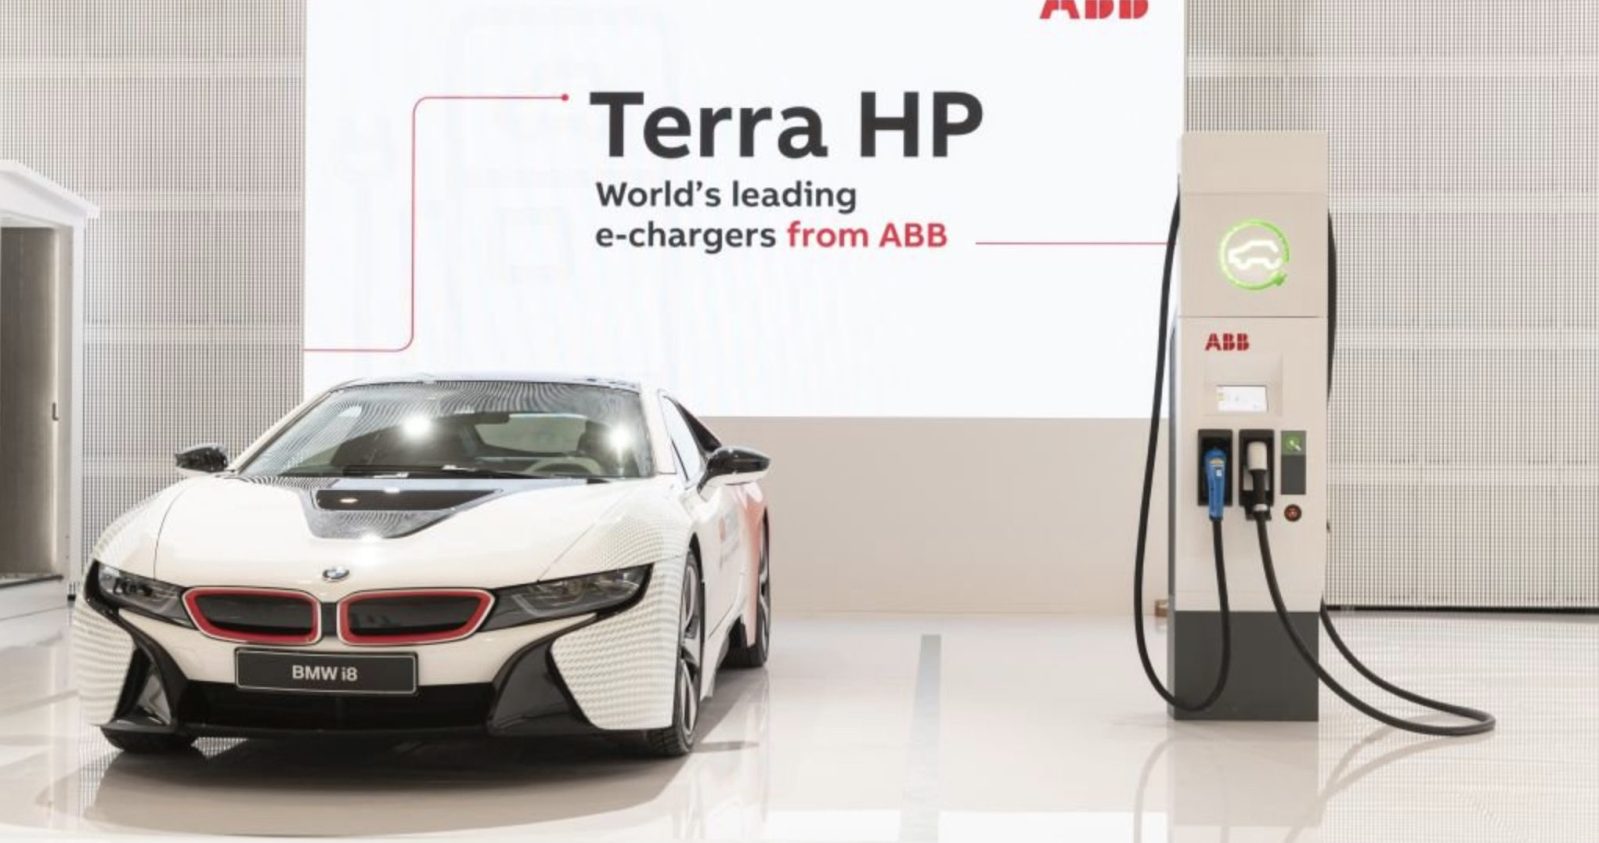 ABB unveils its 350 kW electric vehicle charging tech, claims 200 km of